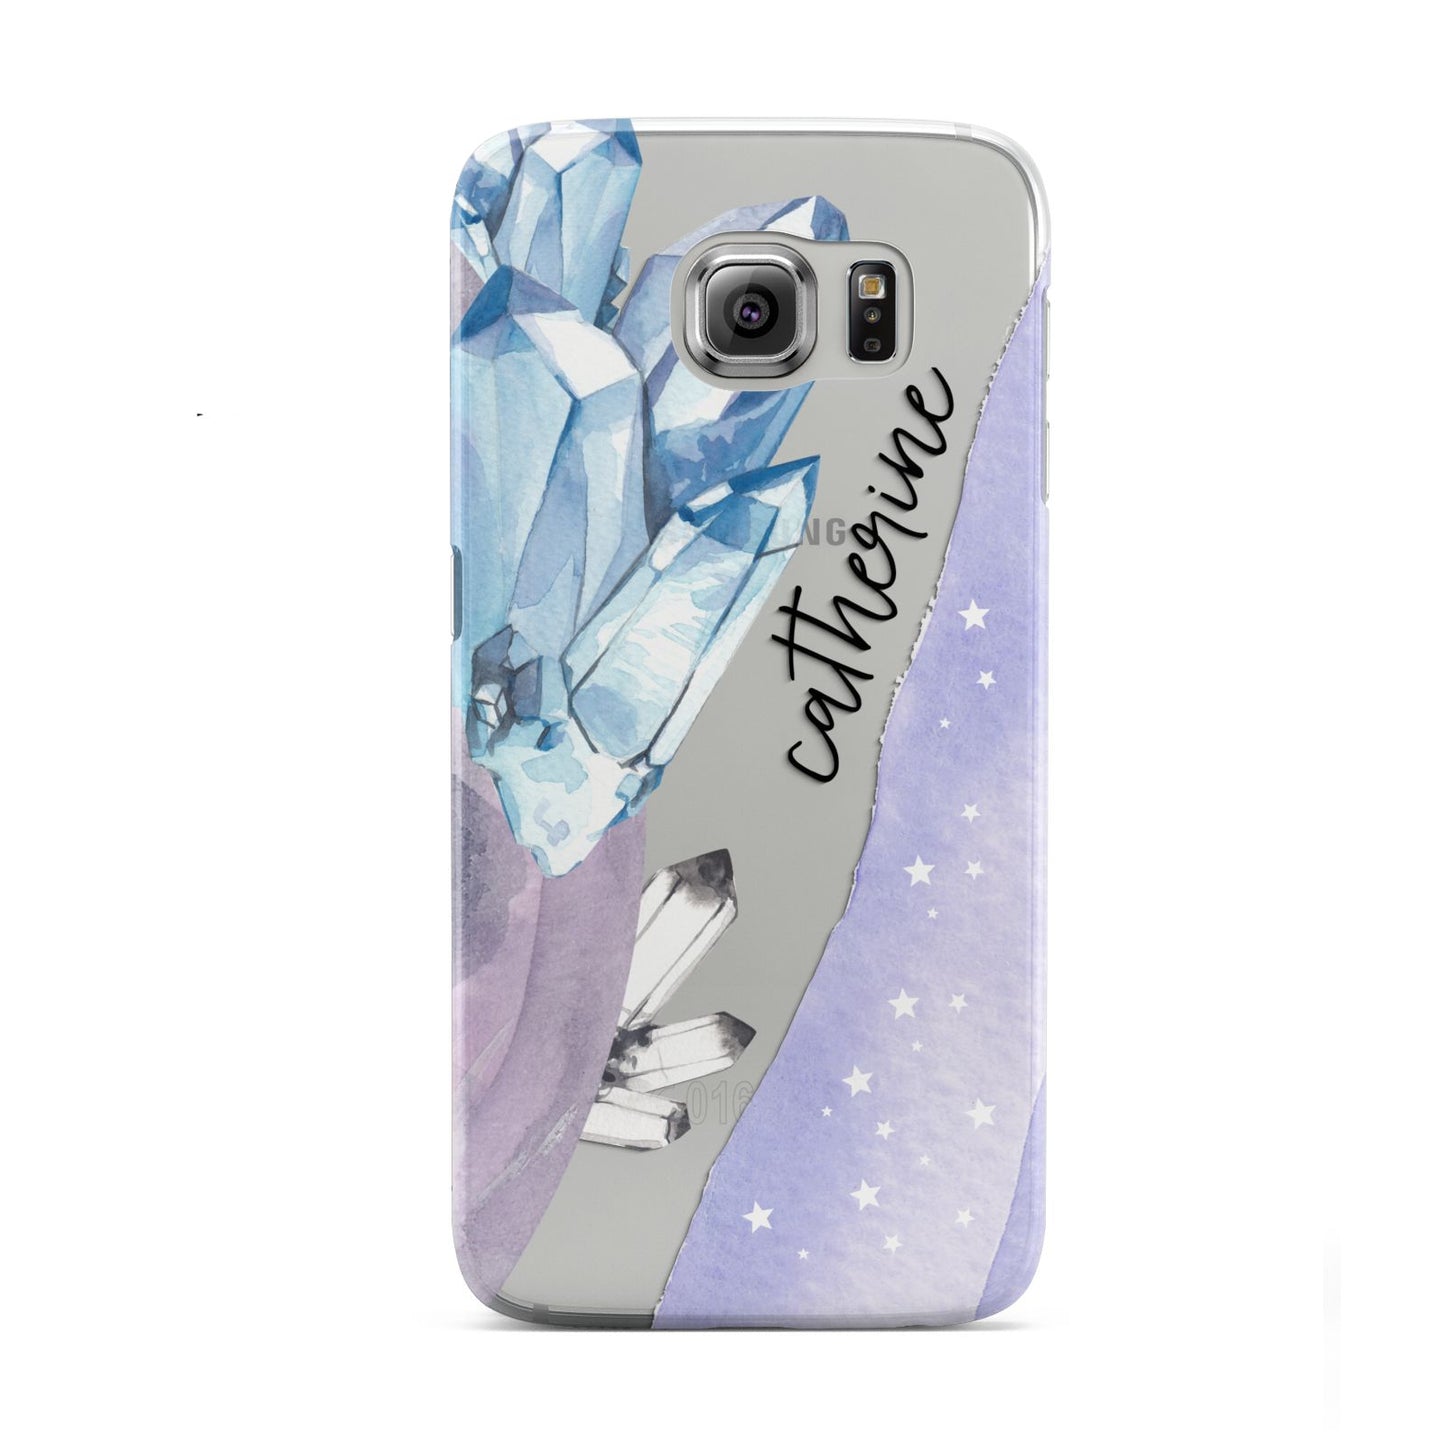 Crystals Personalised Name Samsung Galaxy S6 Case